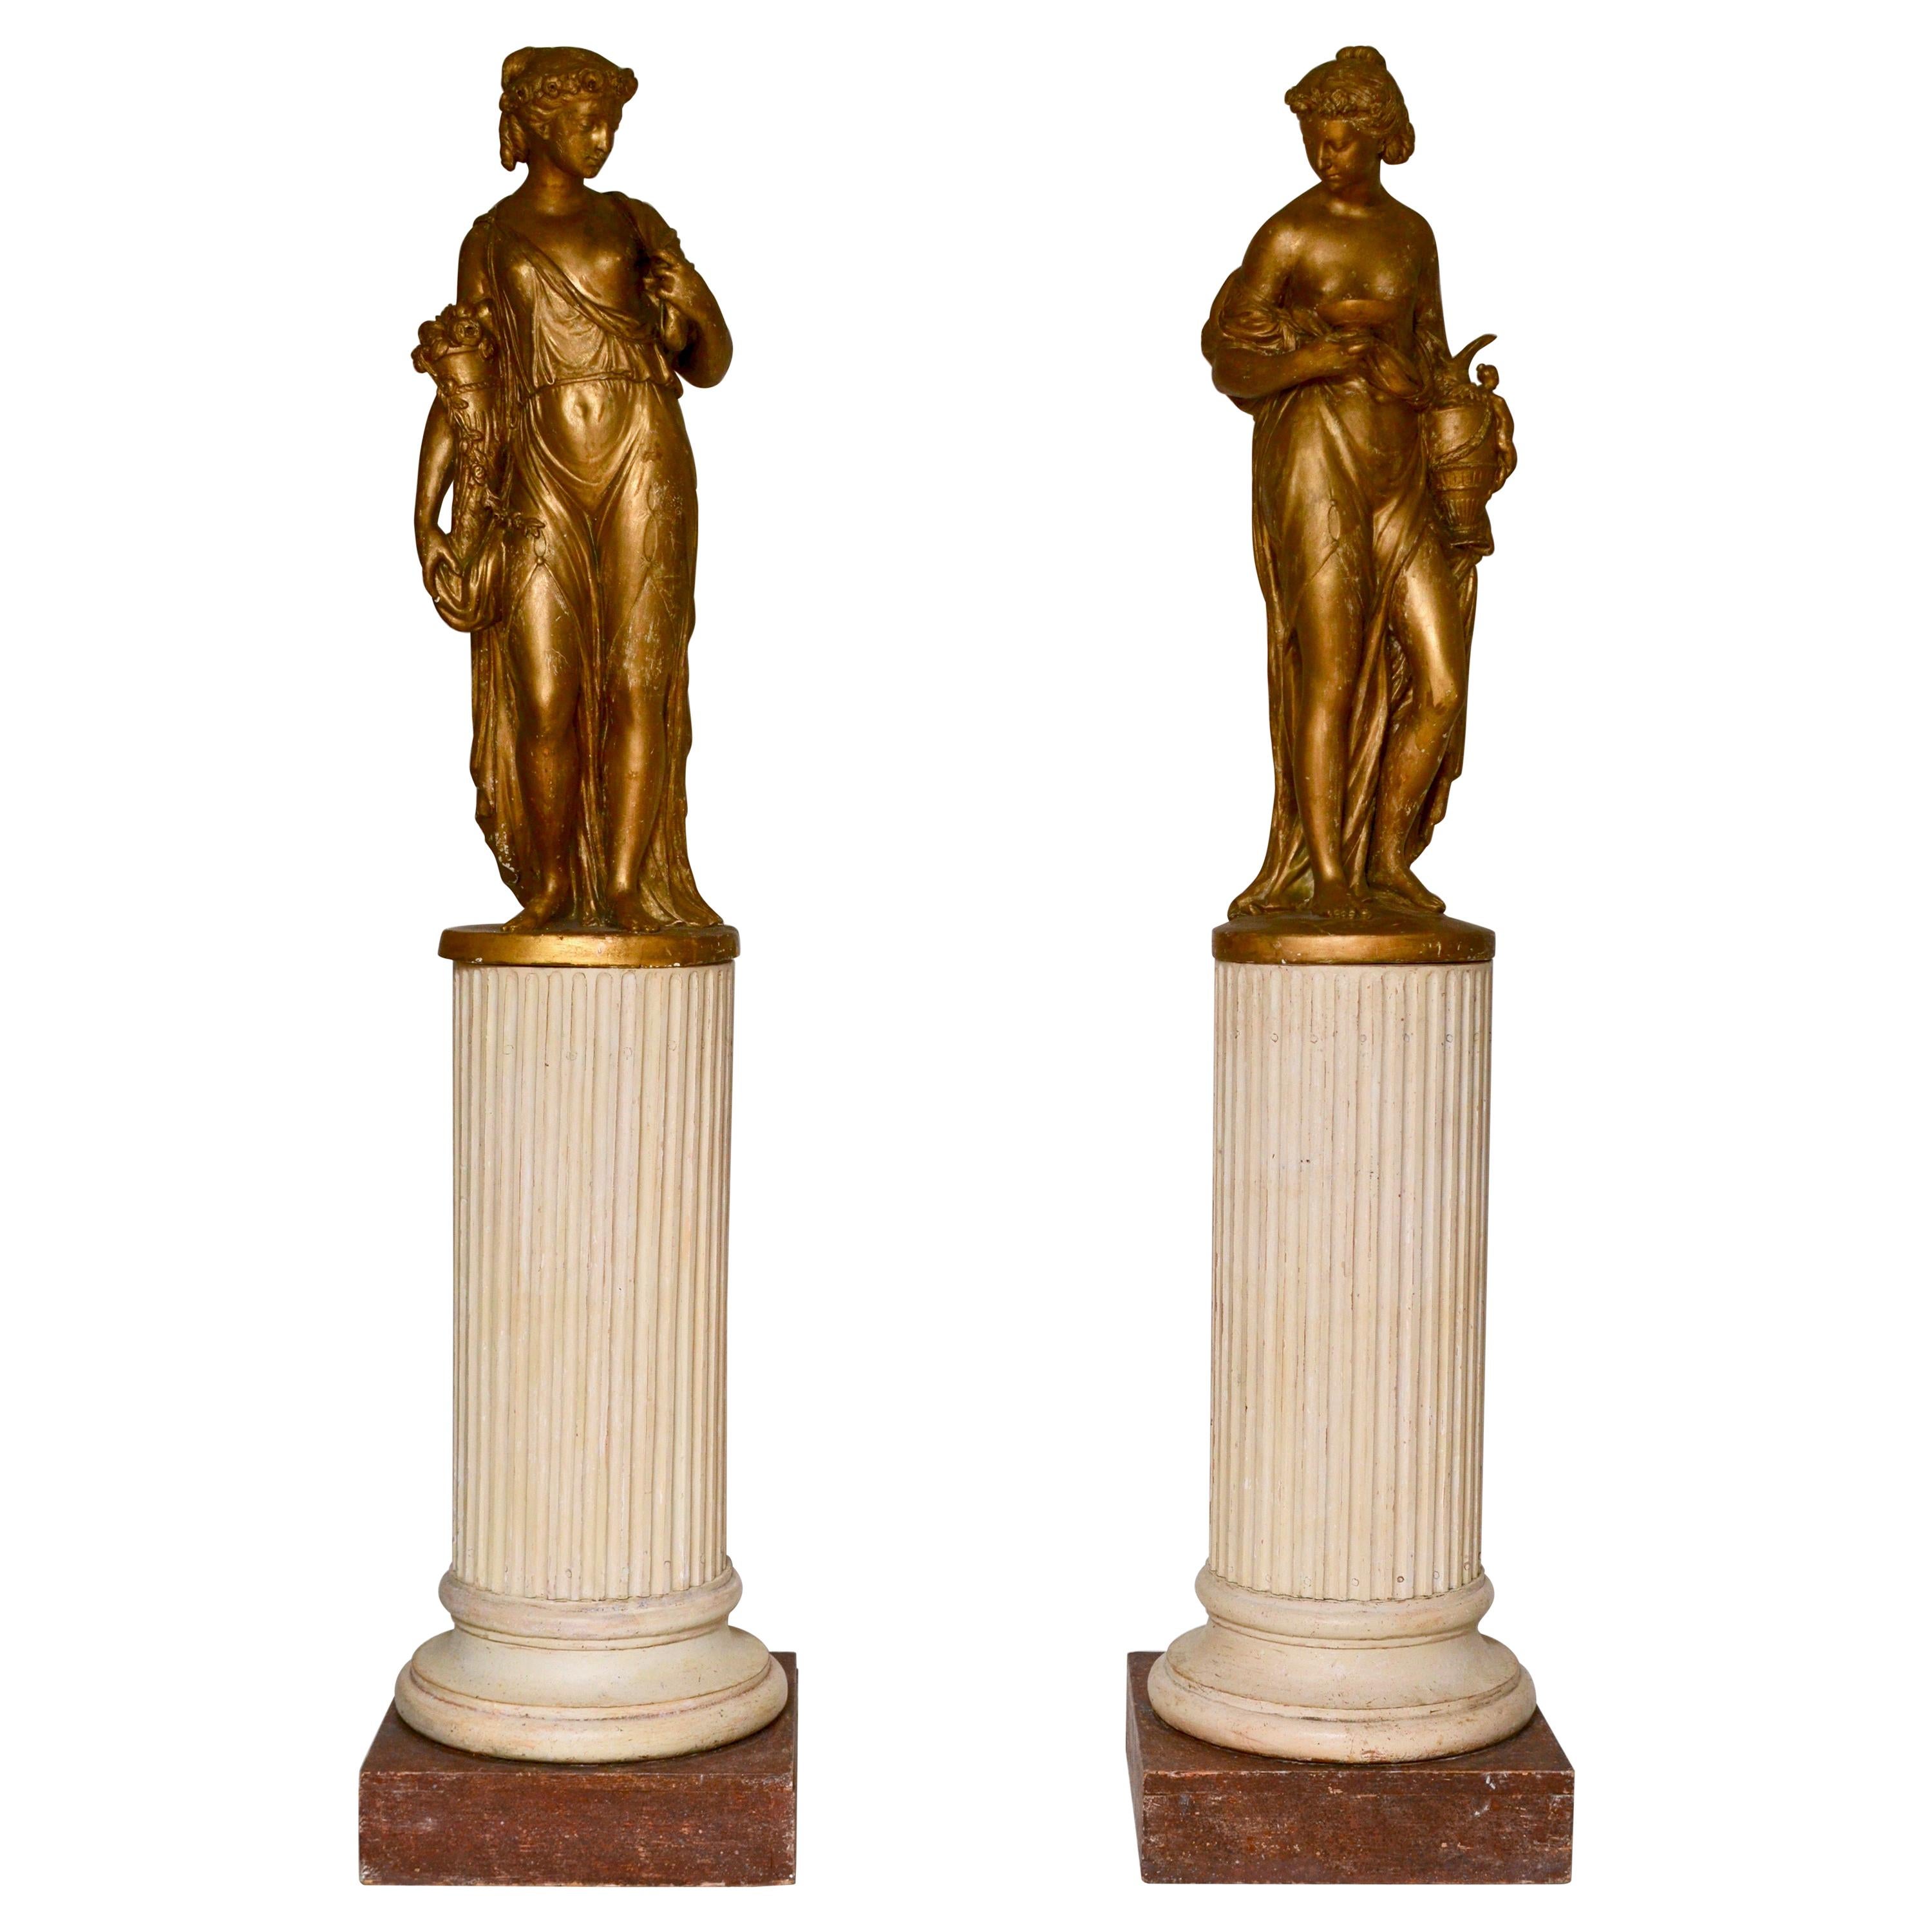 Pair of Gilt Allegorical Plaster Sculptures Representing Spring and Autumn